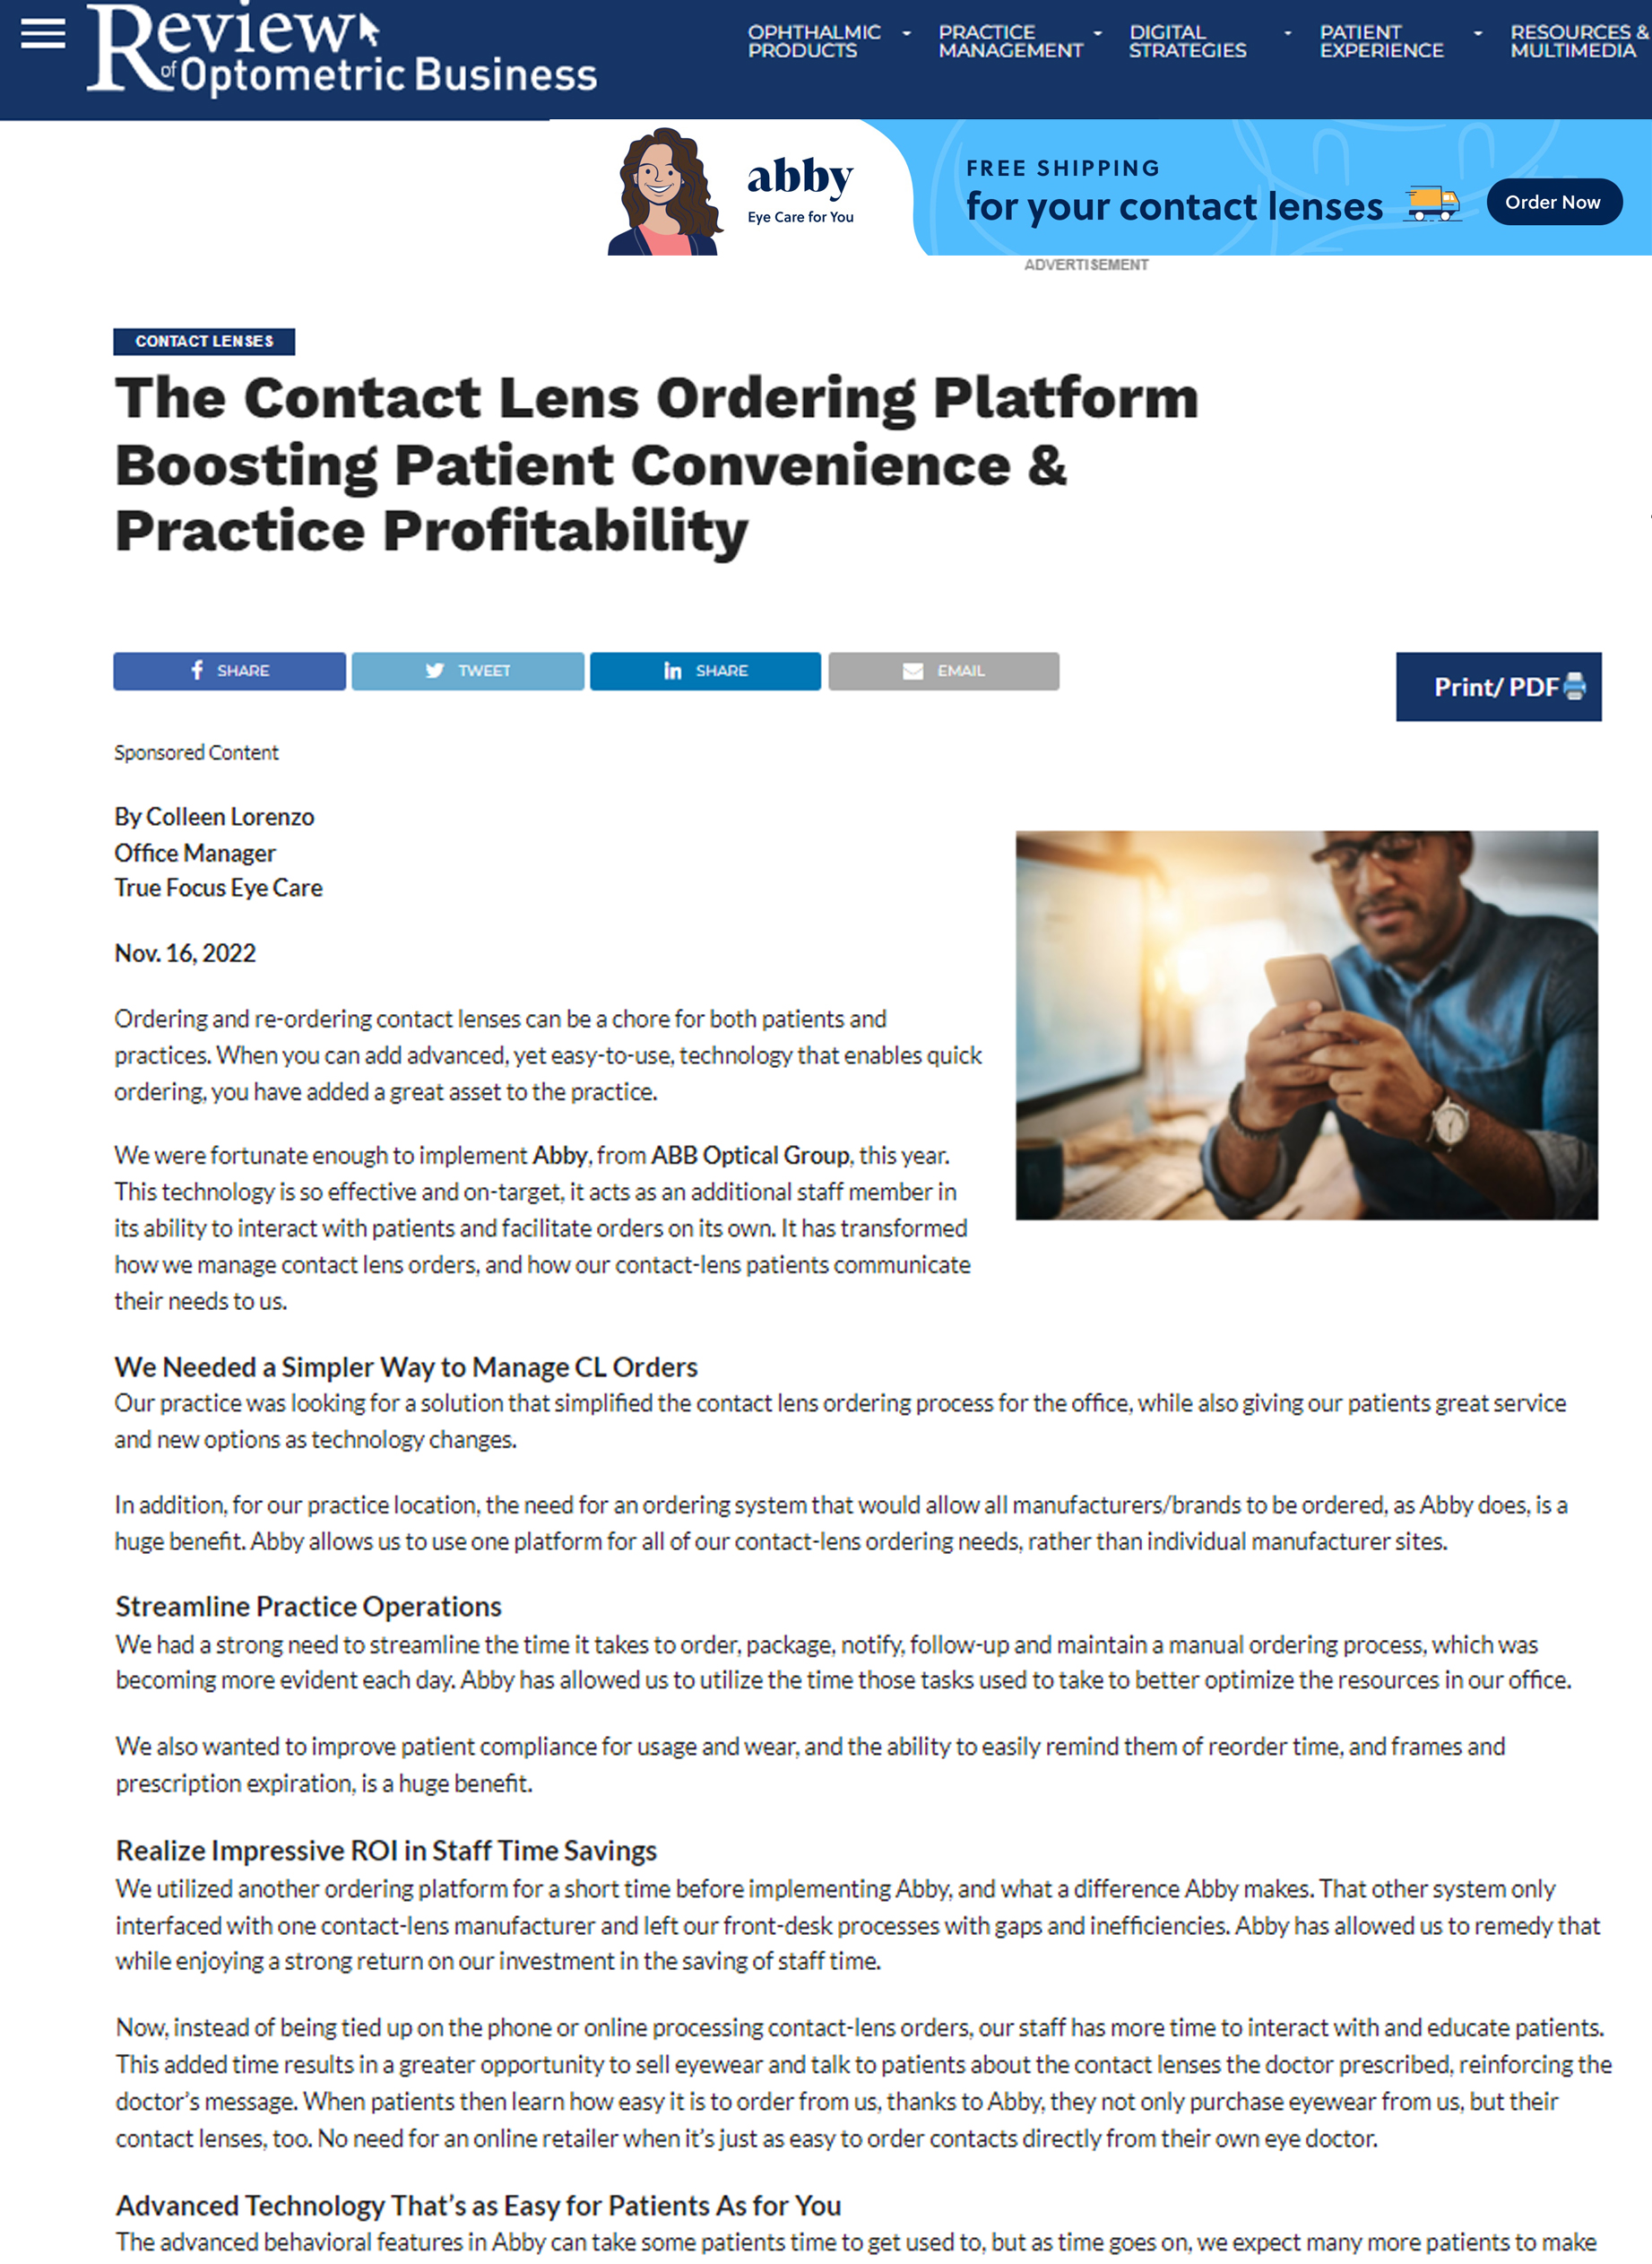 Abby Contact Lens Ordering Platform Article on Review of Optometric Business - 11-17-22- article